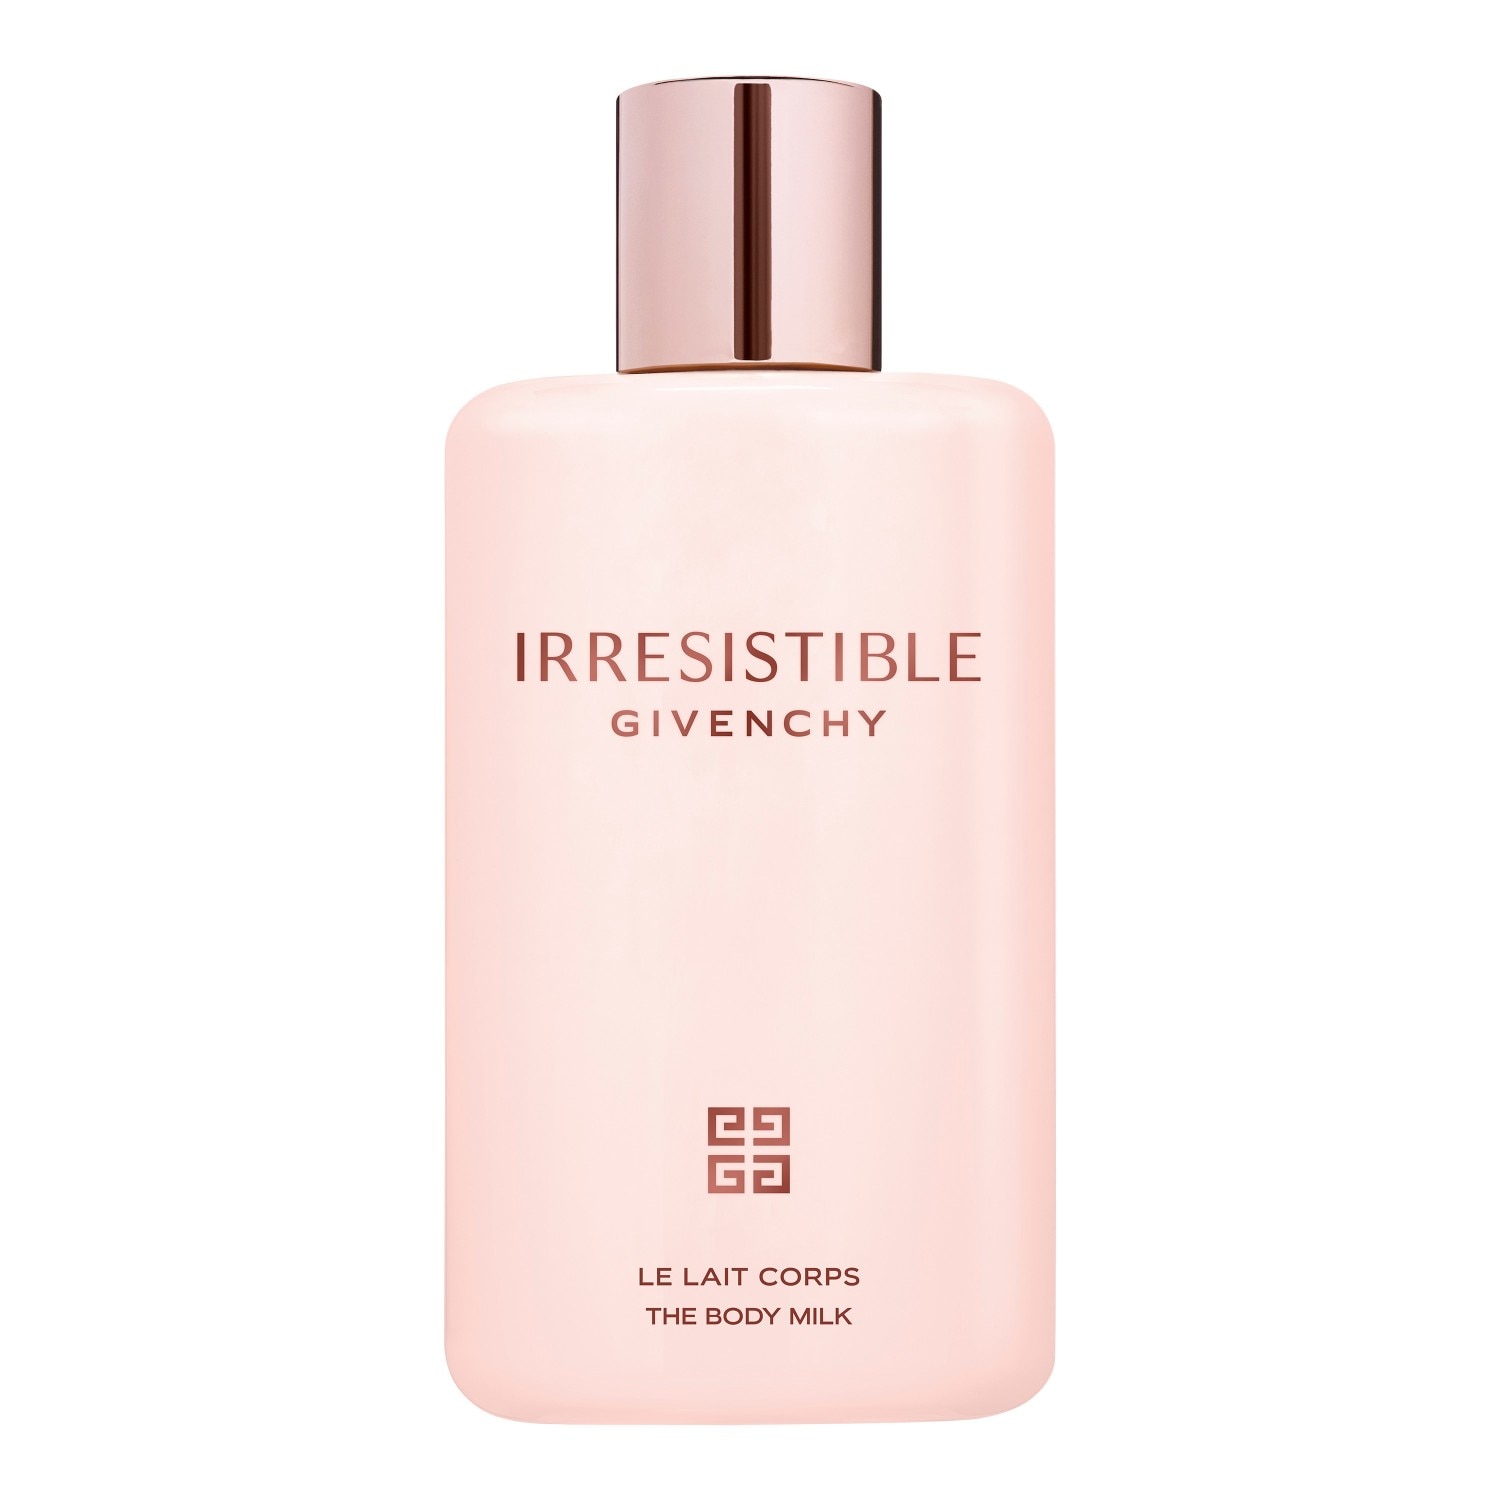 Irresistible Givenchy The Body Milk